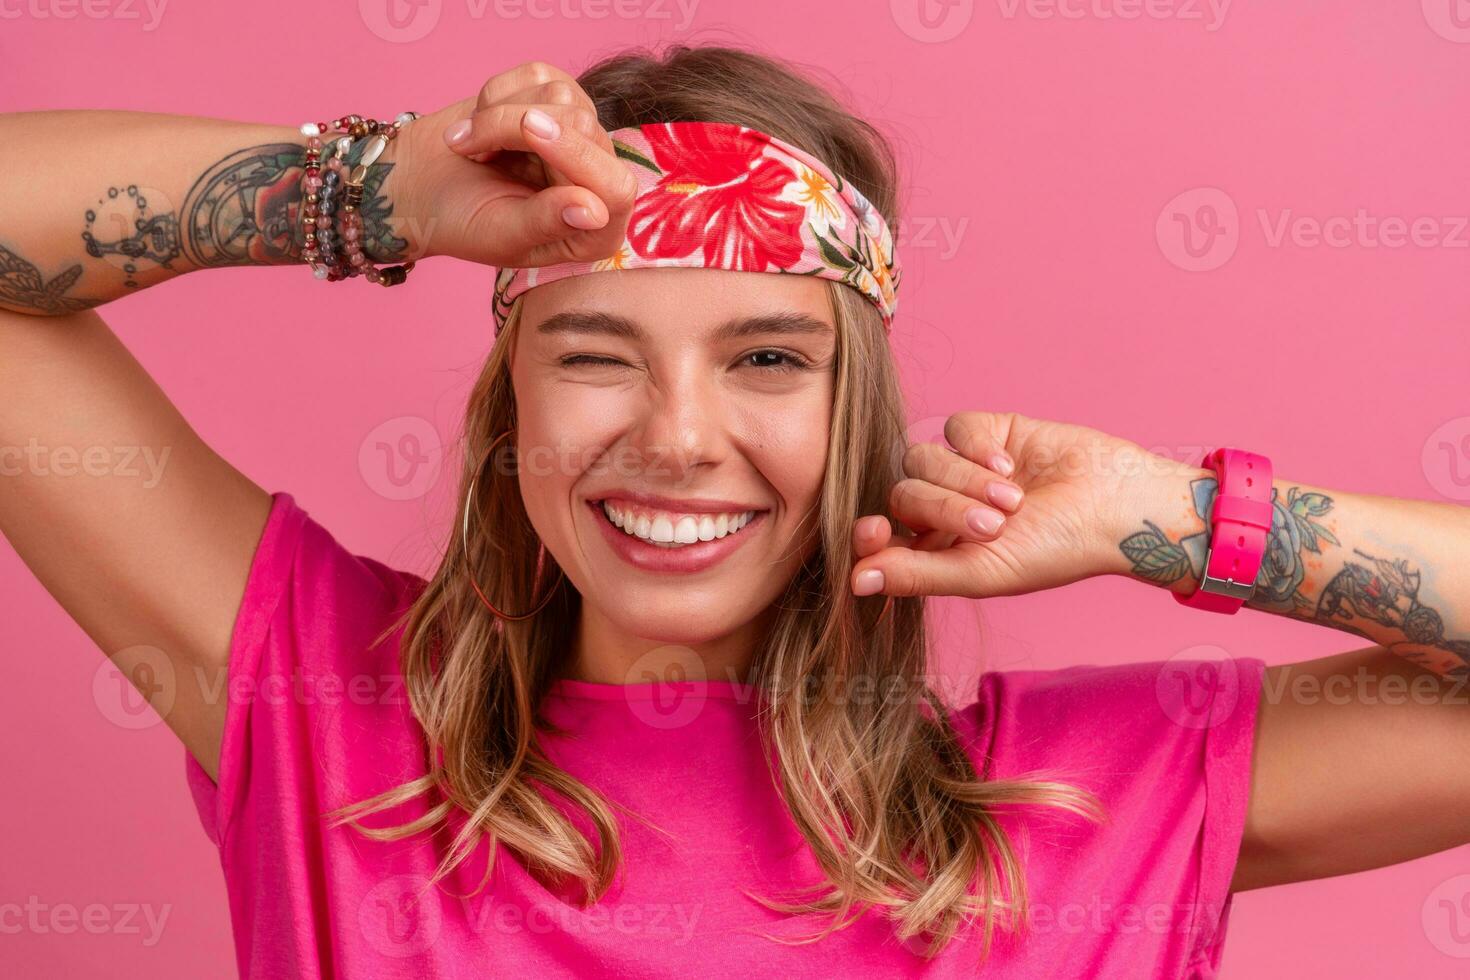 pretty cute smiling woman in pink shirt boho hippie style accessories smiling photo